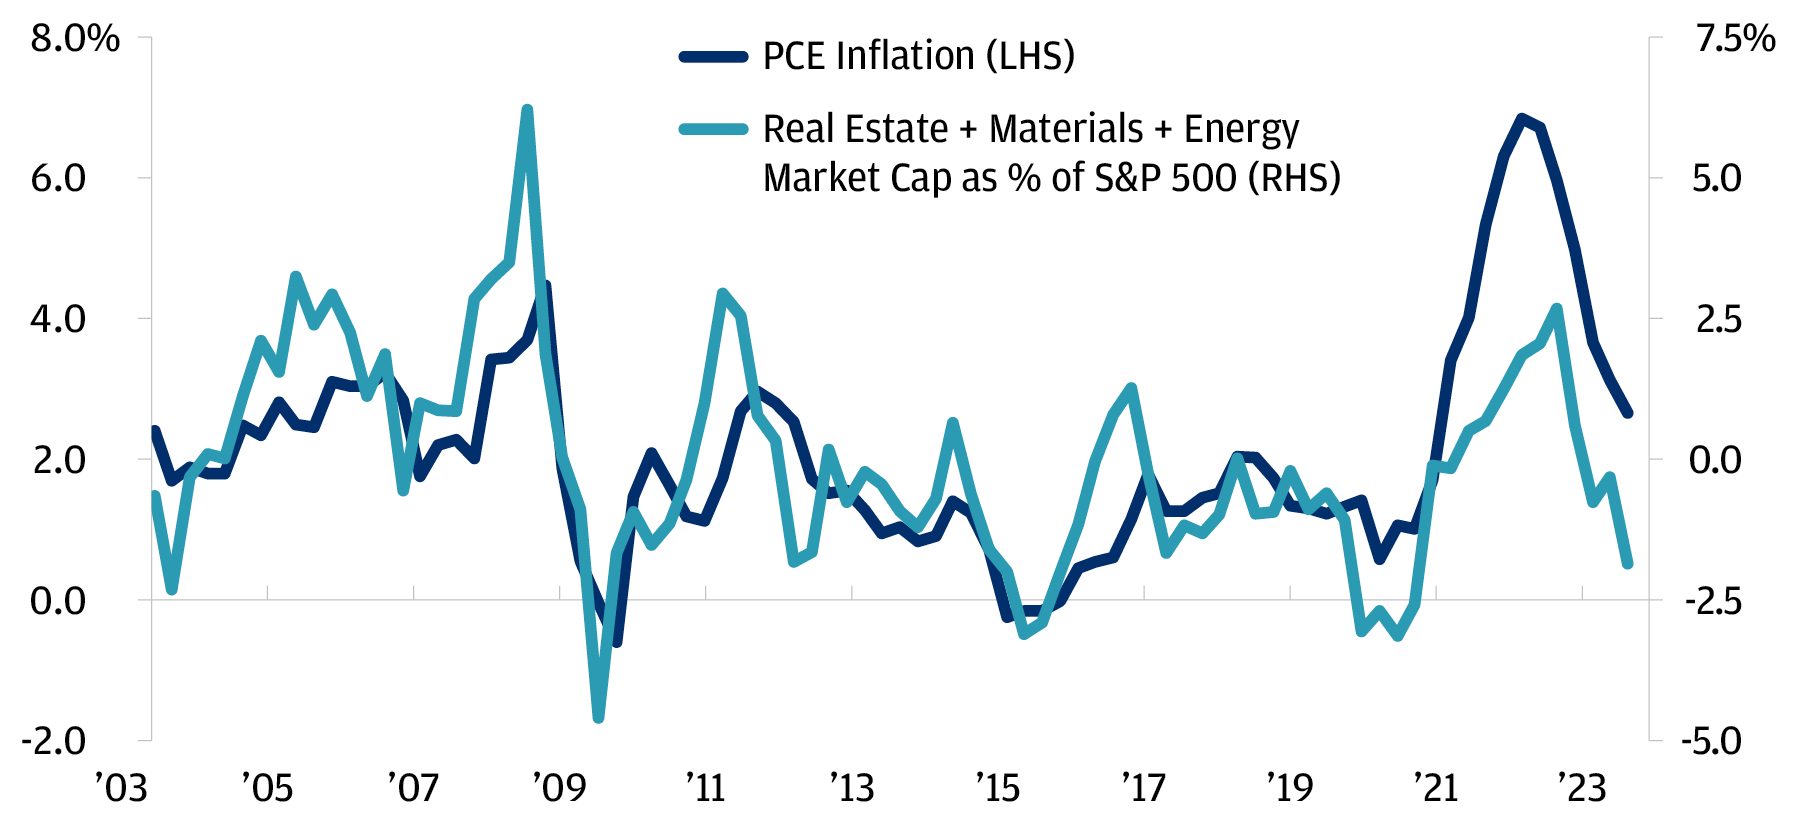 The chart describes the year-over-year % change of PCE inflation as well as the year-over-year % change of the real estate + materials + energy market cap as % share of S&P 500.